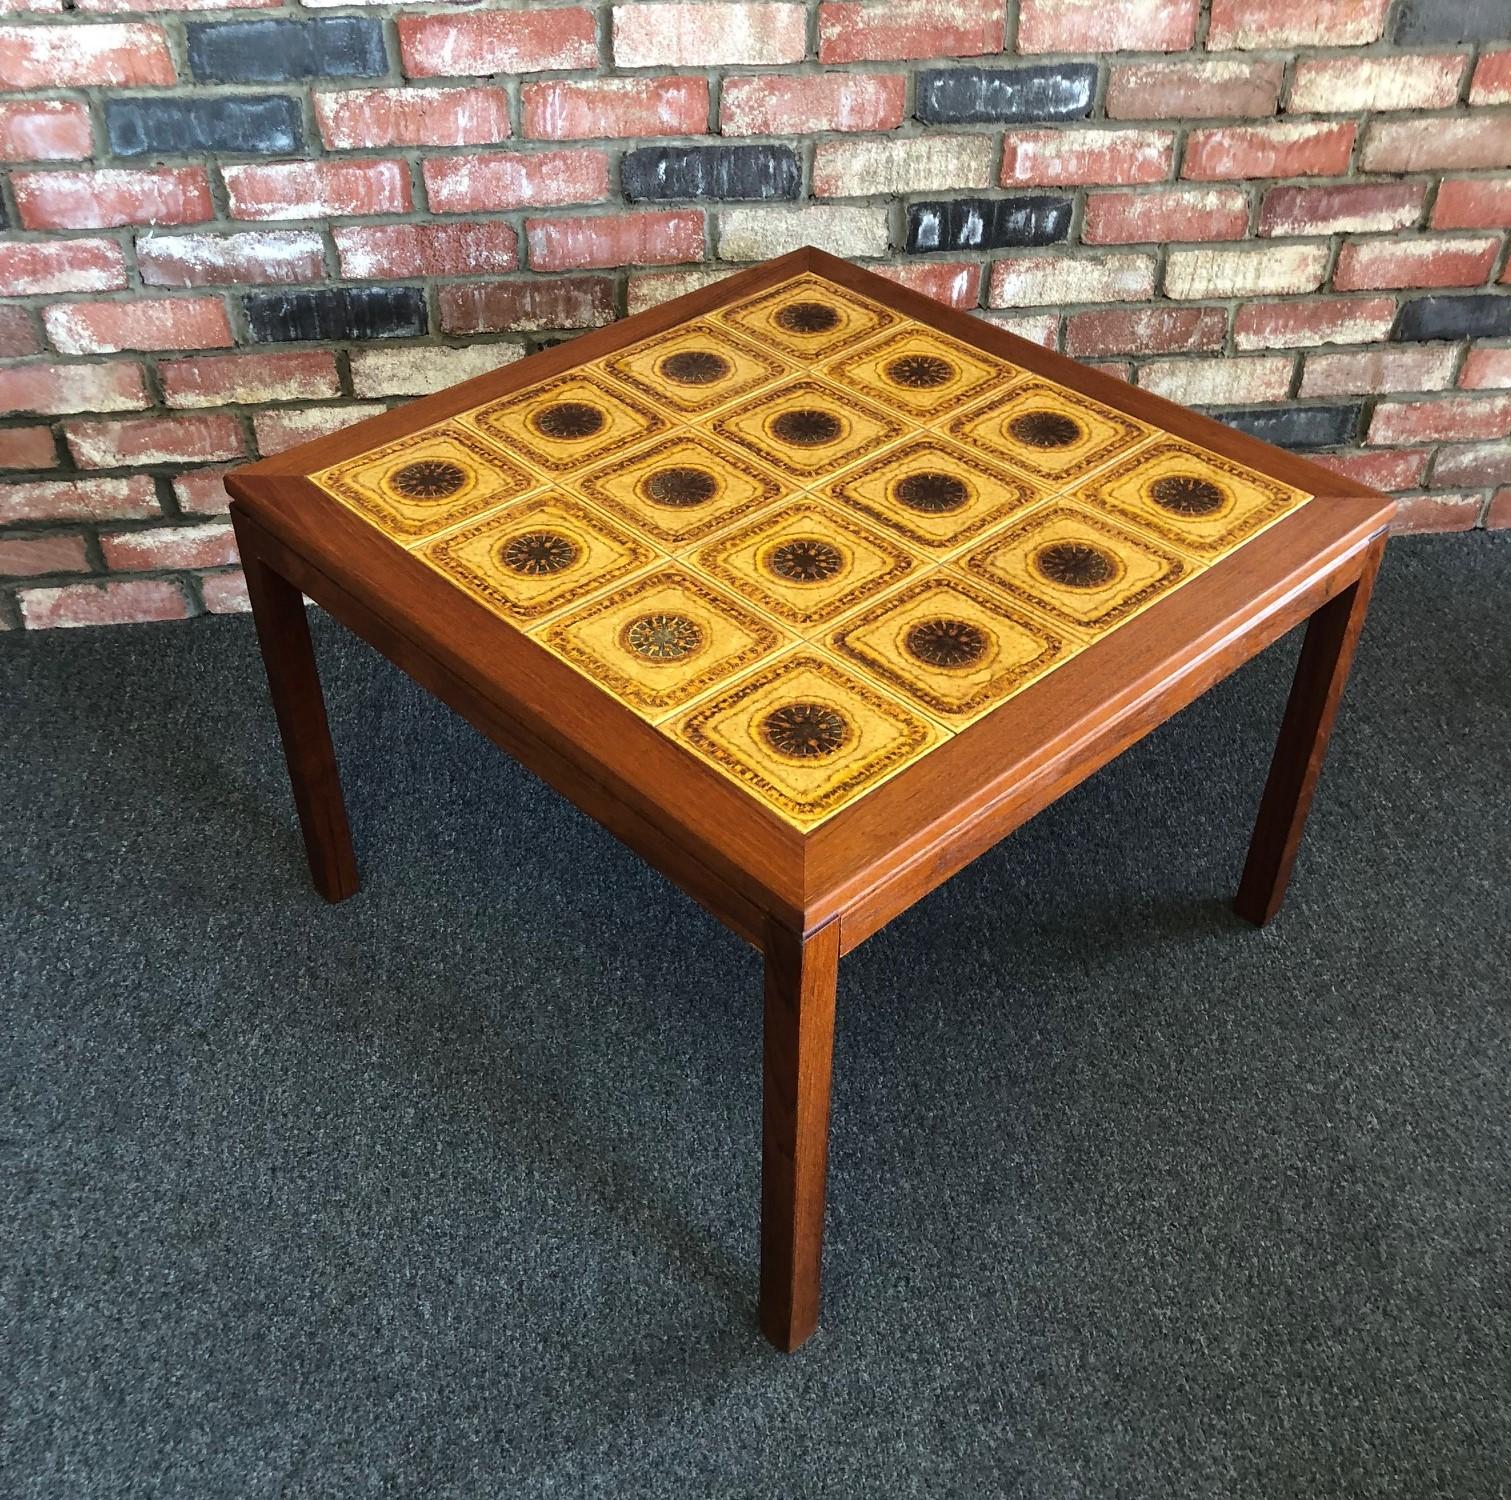 Midcentury Danish Tile and Teak Side Table In Excellent Condition For Sale In San Diego, CA